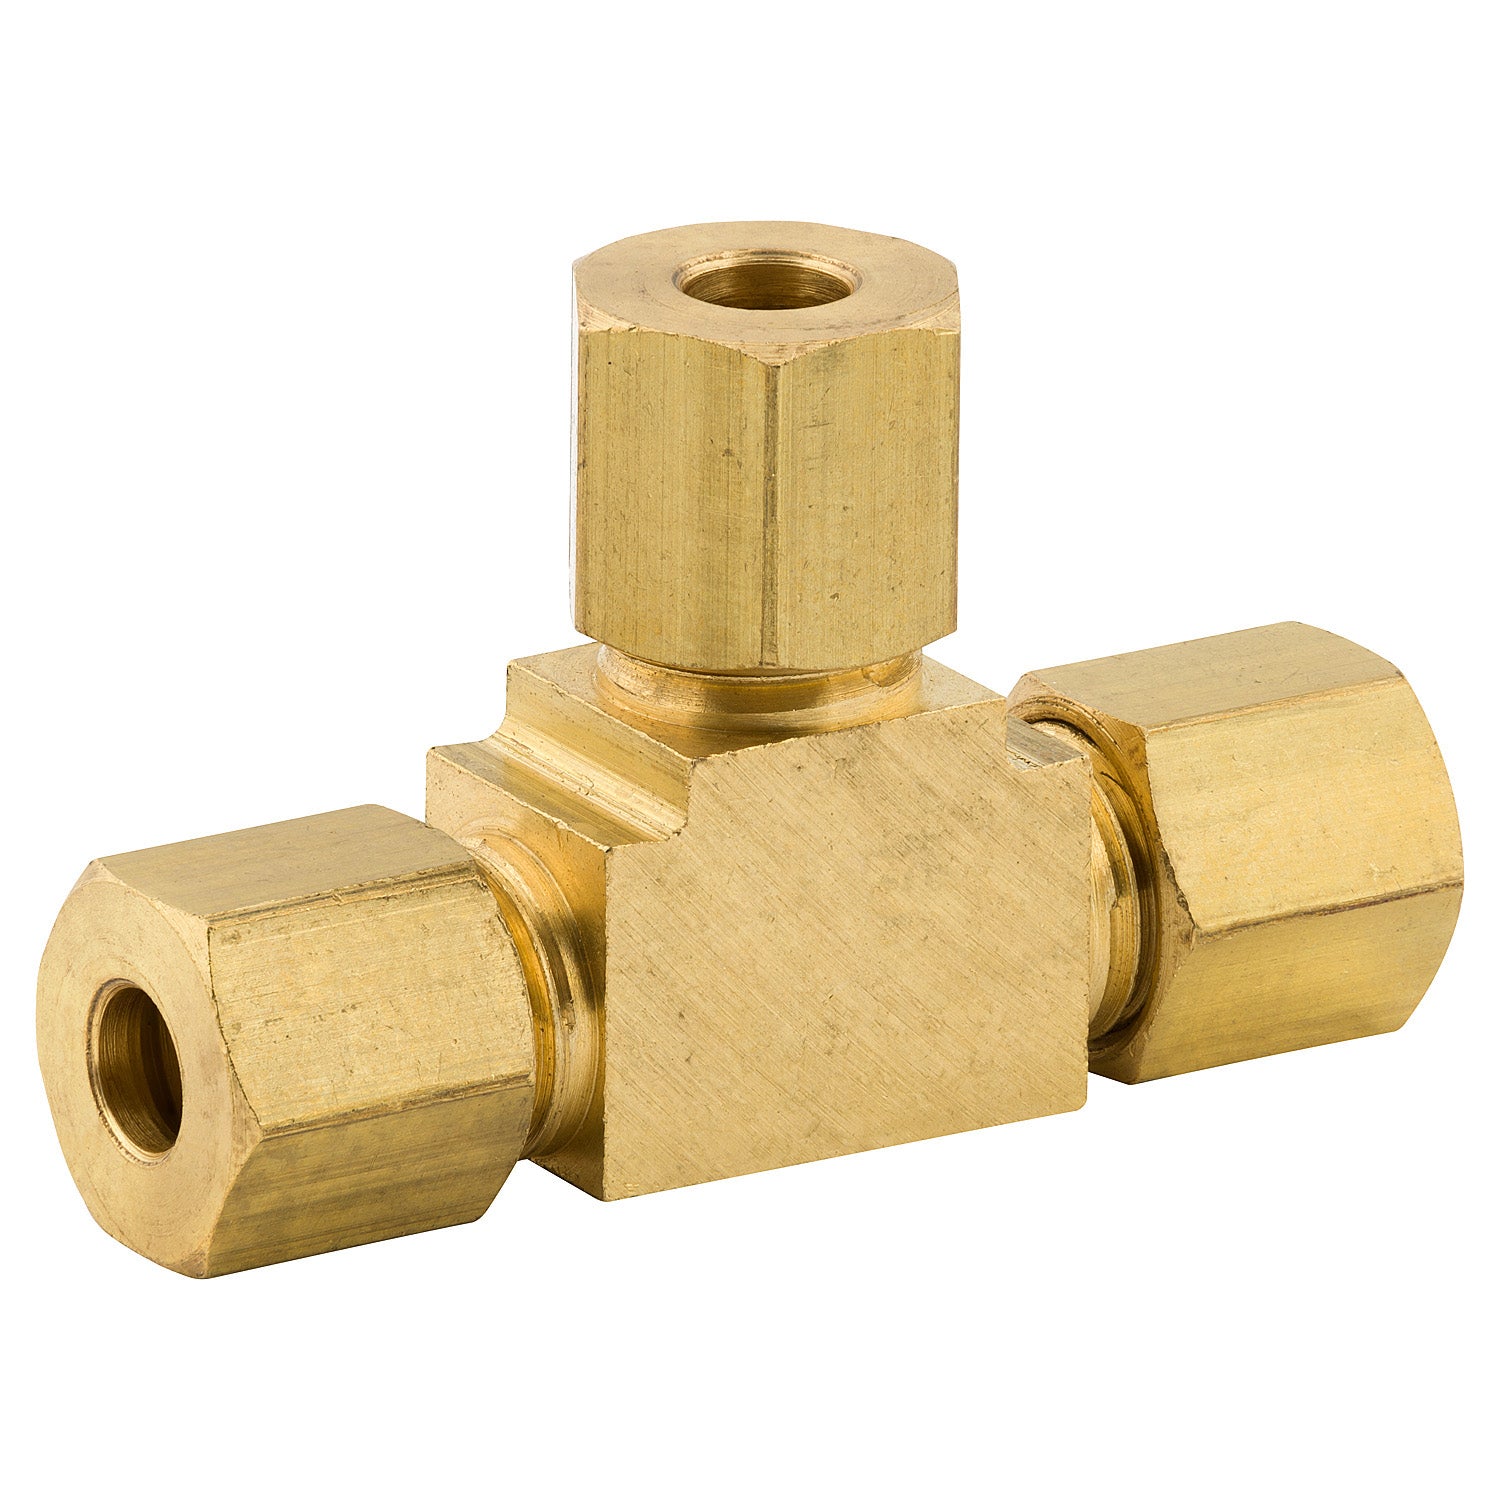 3/16 Tube Support, Tube Insert for Compression Fittings Brass